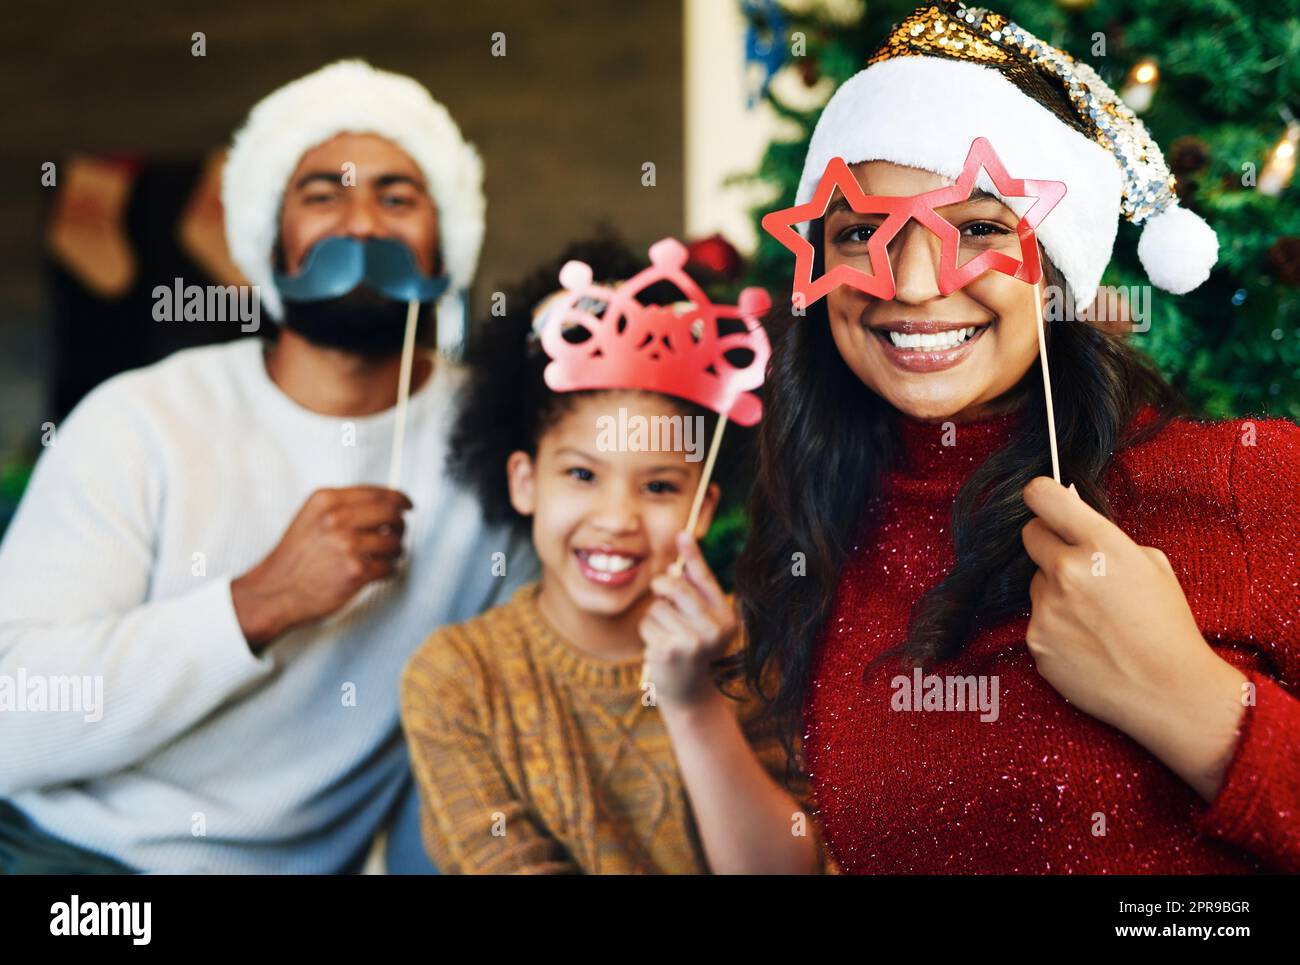 Christmas party at our place. a happy young family celebrating Christmas at home. Stock Photo